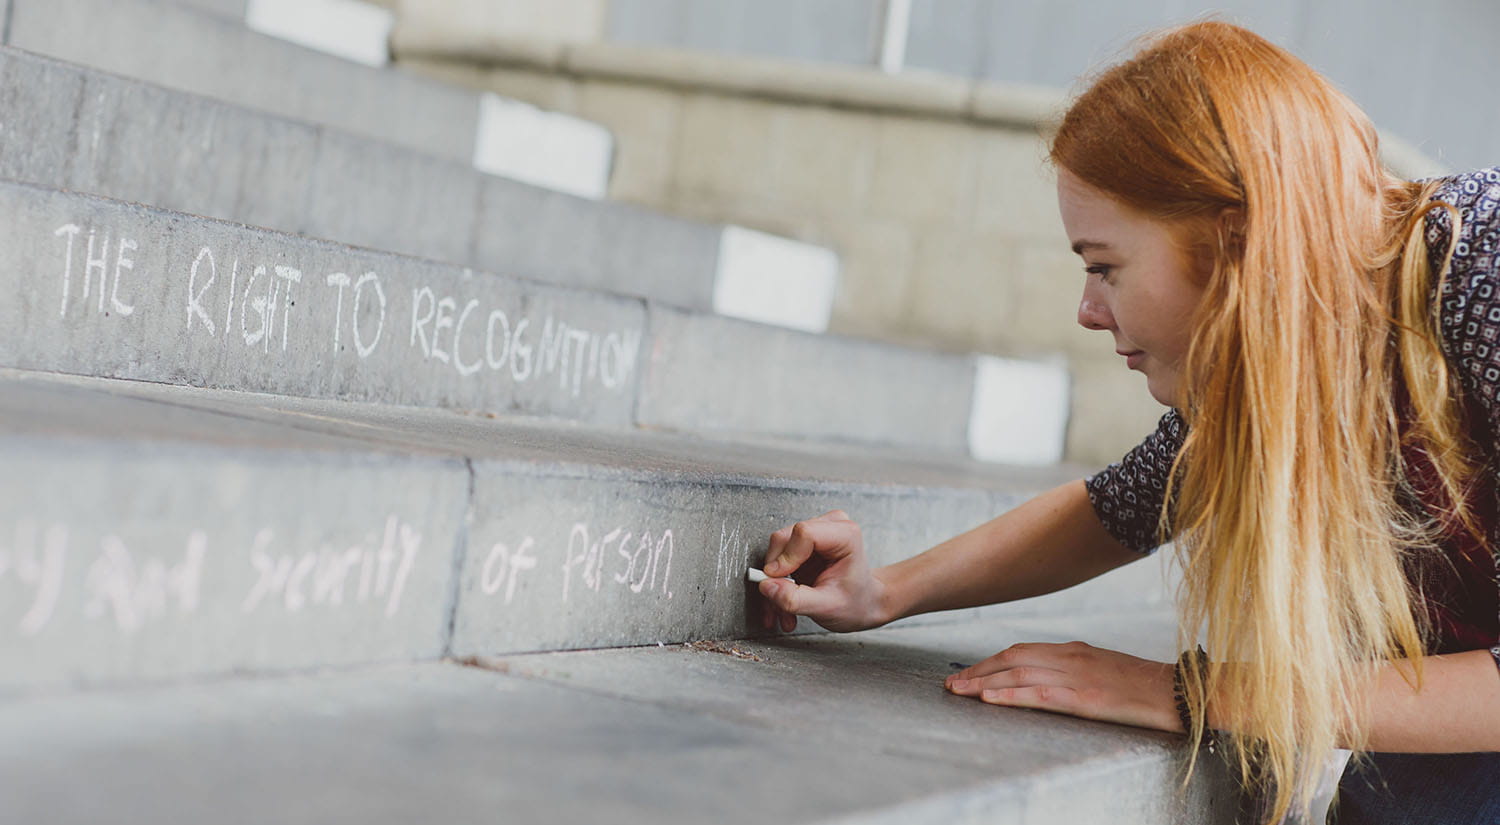 Female writing a message with chalk on outdoor steps 